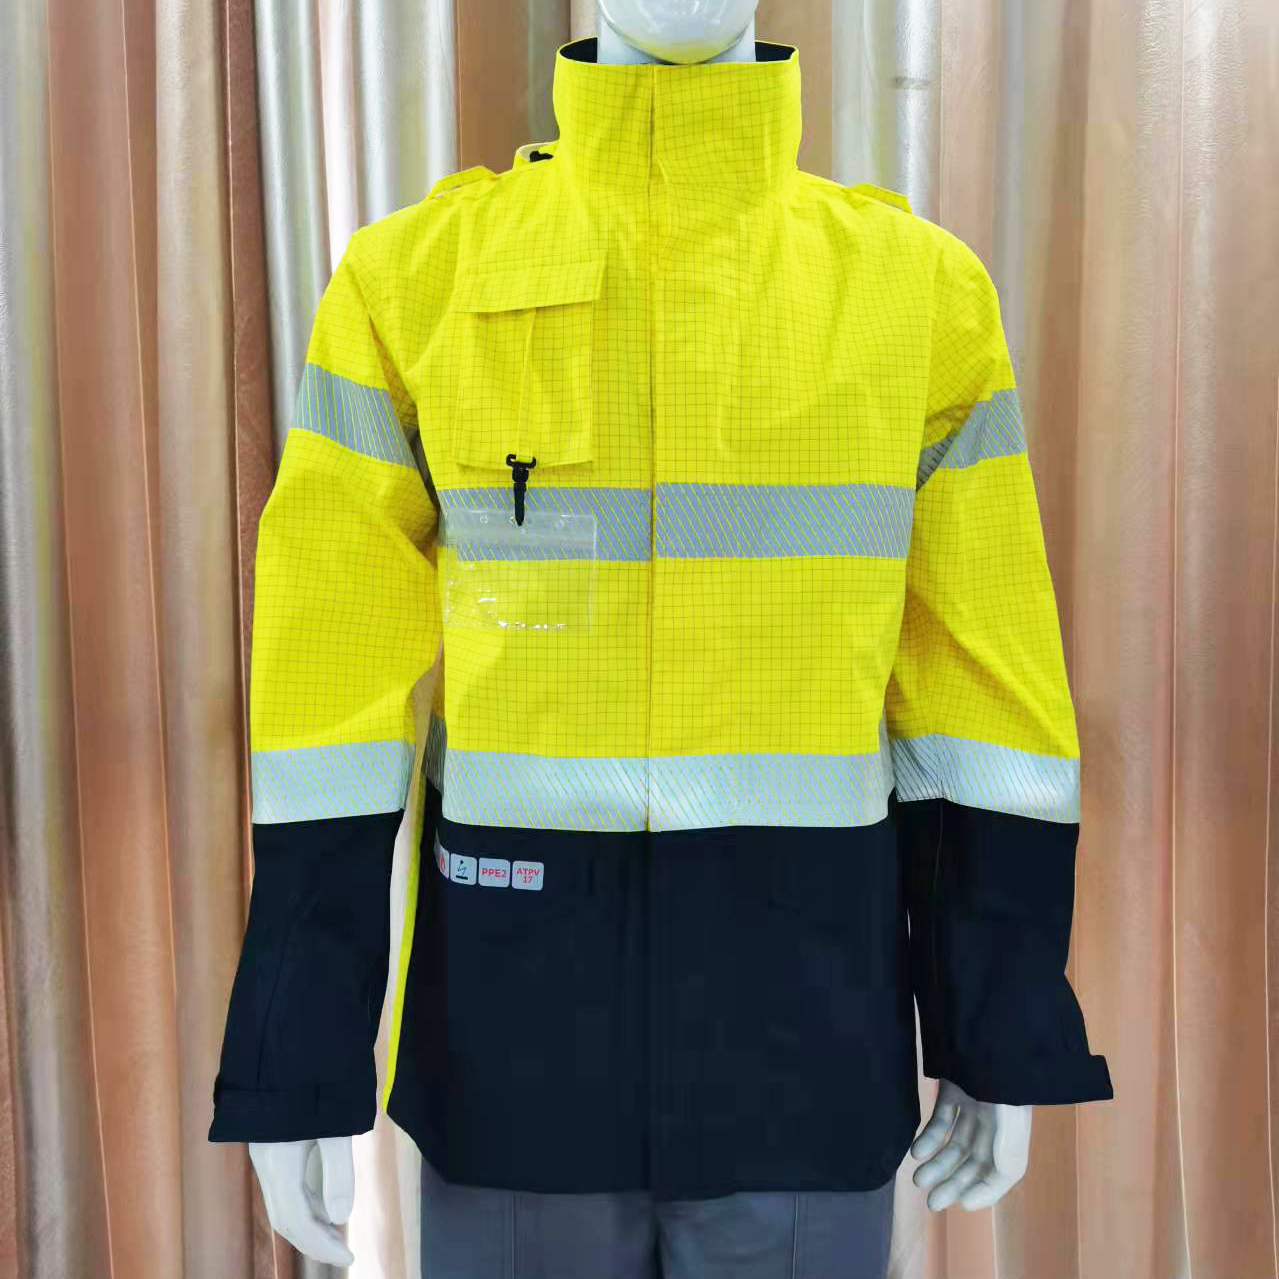 Flame Retardant Antistatic Waterproof HIgh Visible Safety Jacket 300D Oxford